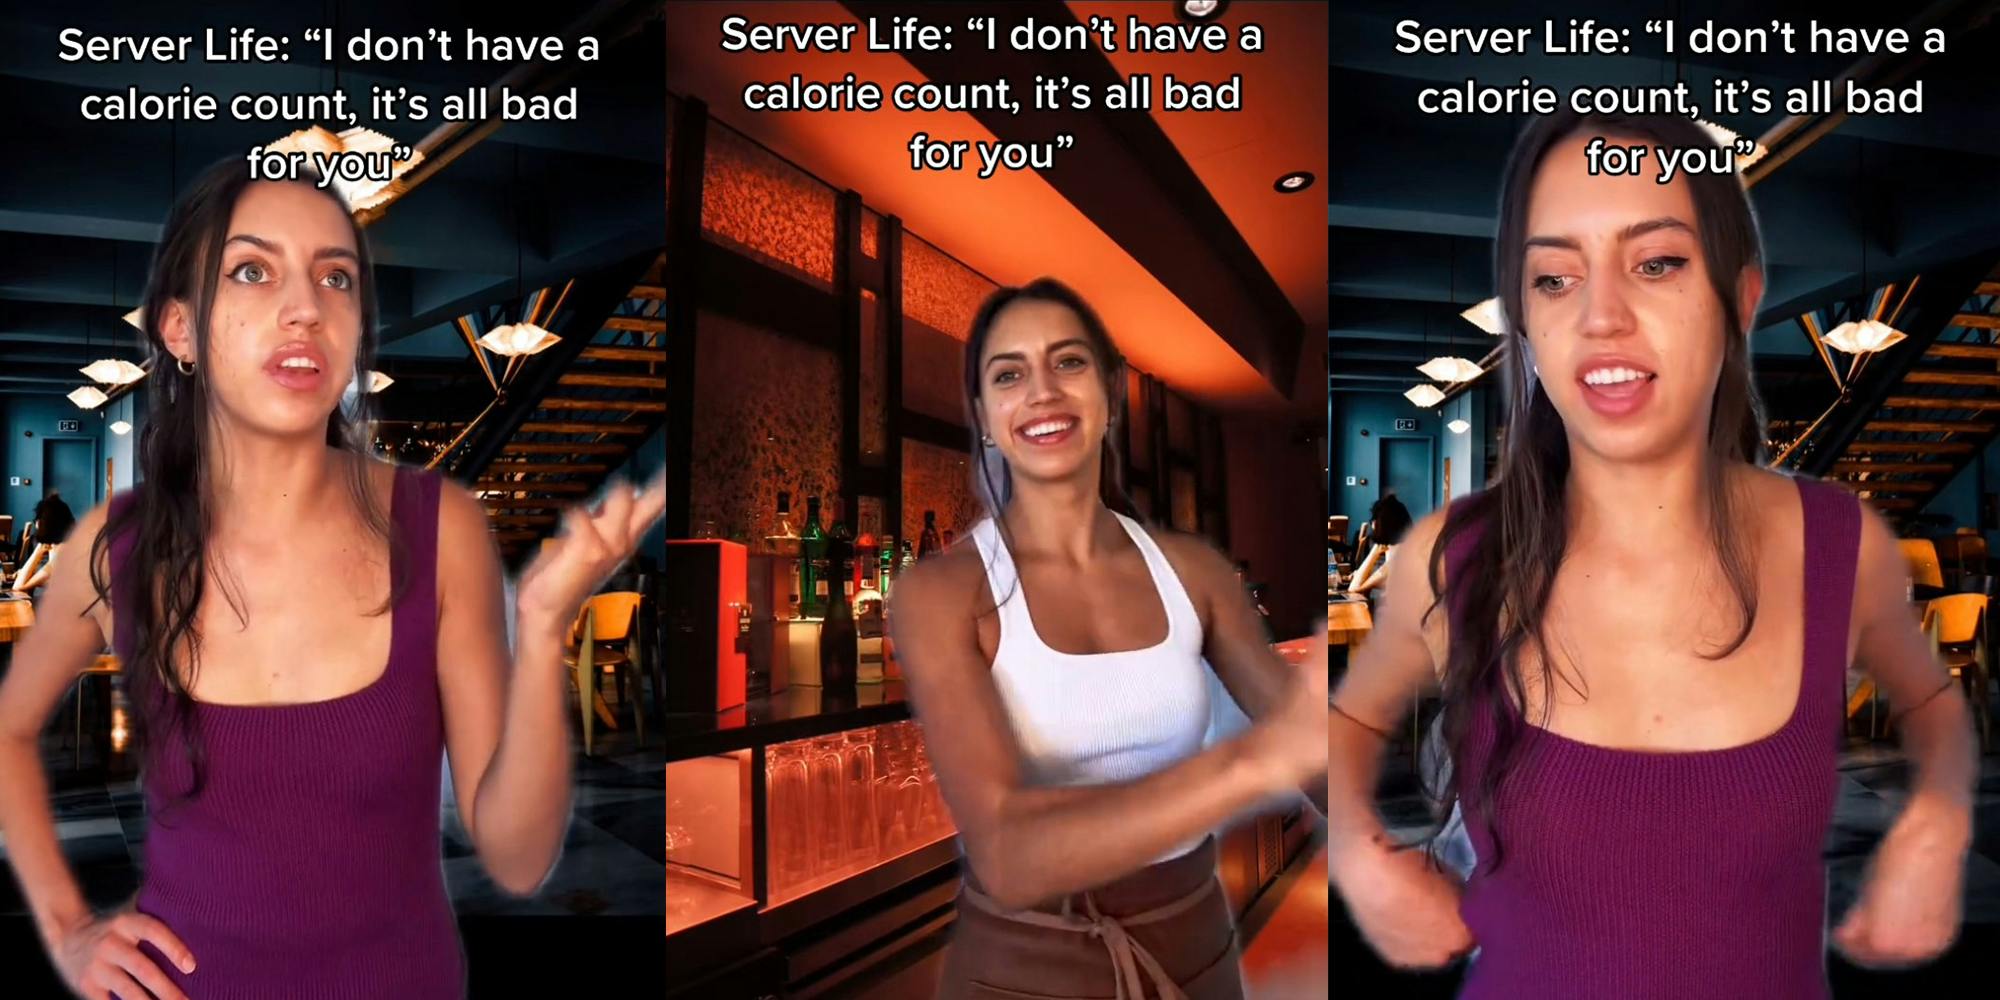 Bartender shares how she deals with customers who ask 'how much calories' their drinks have